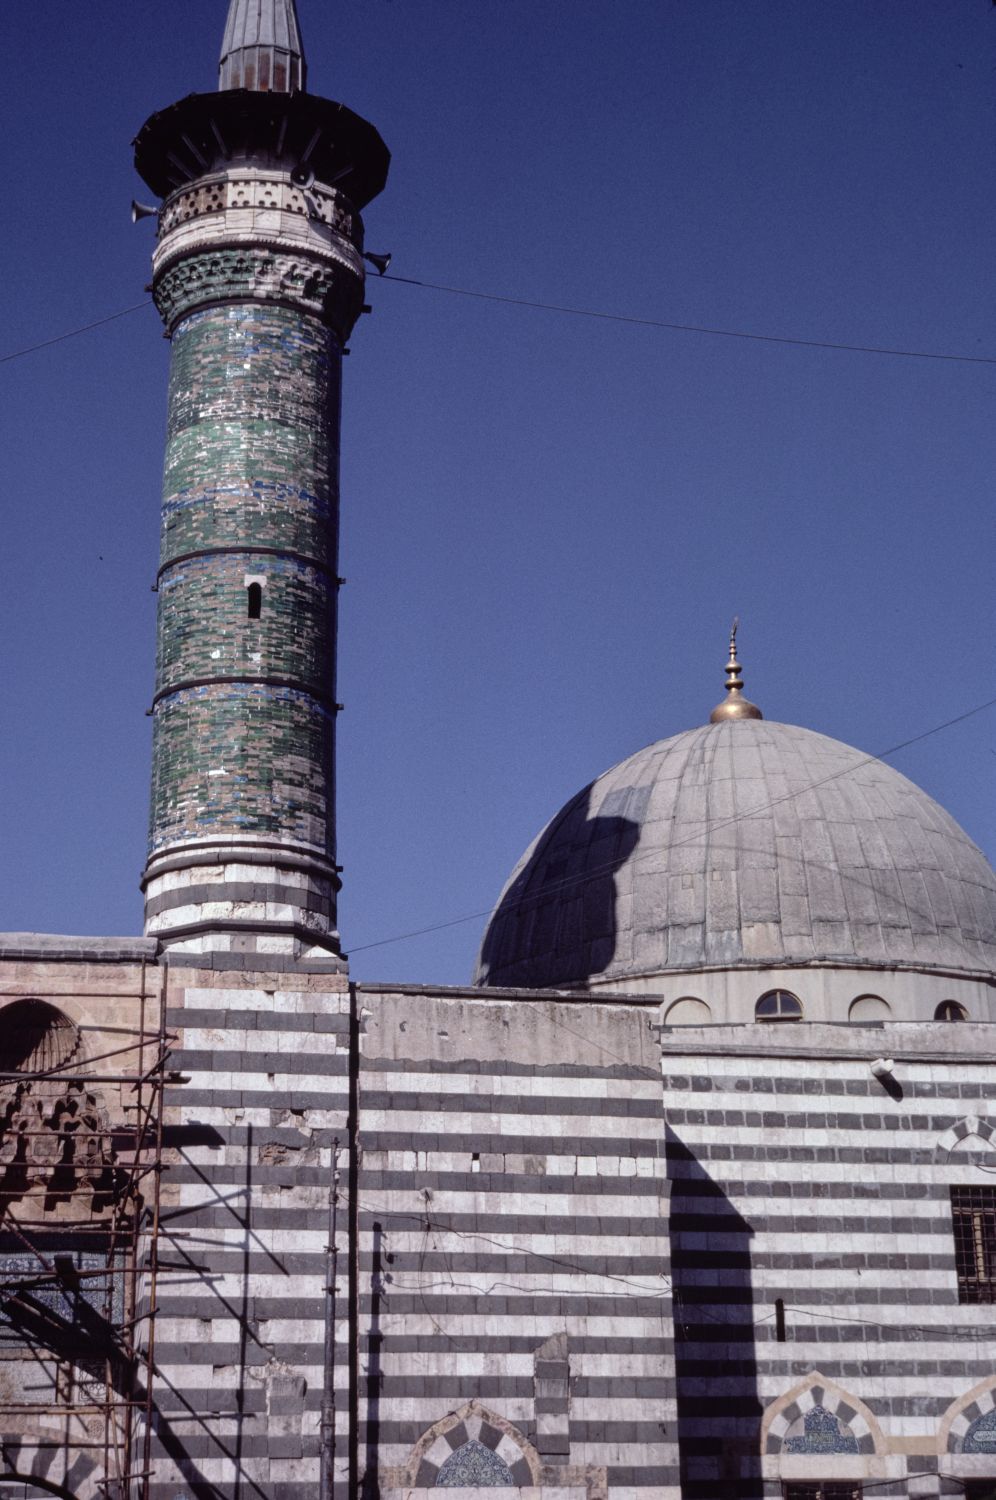 Exterior view of minaret and domed prayer hall.